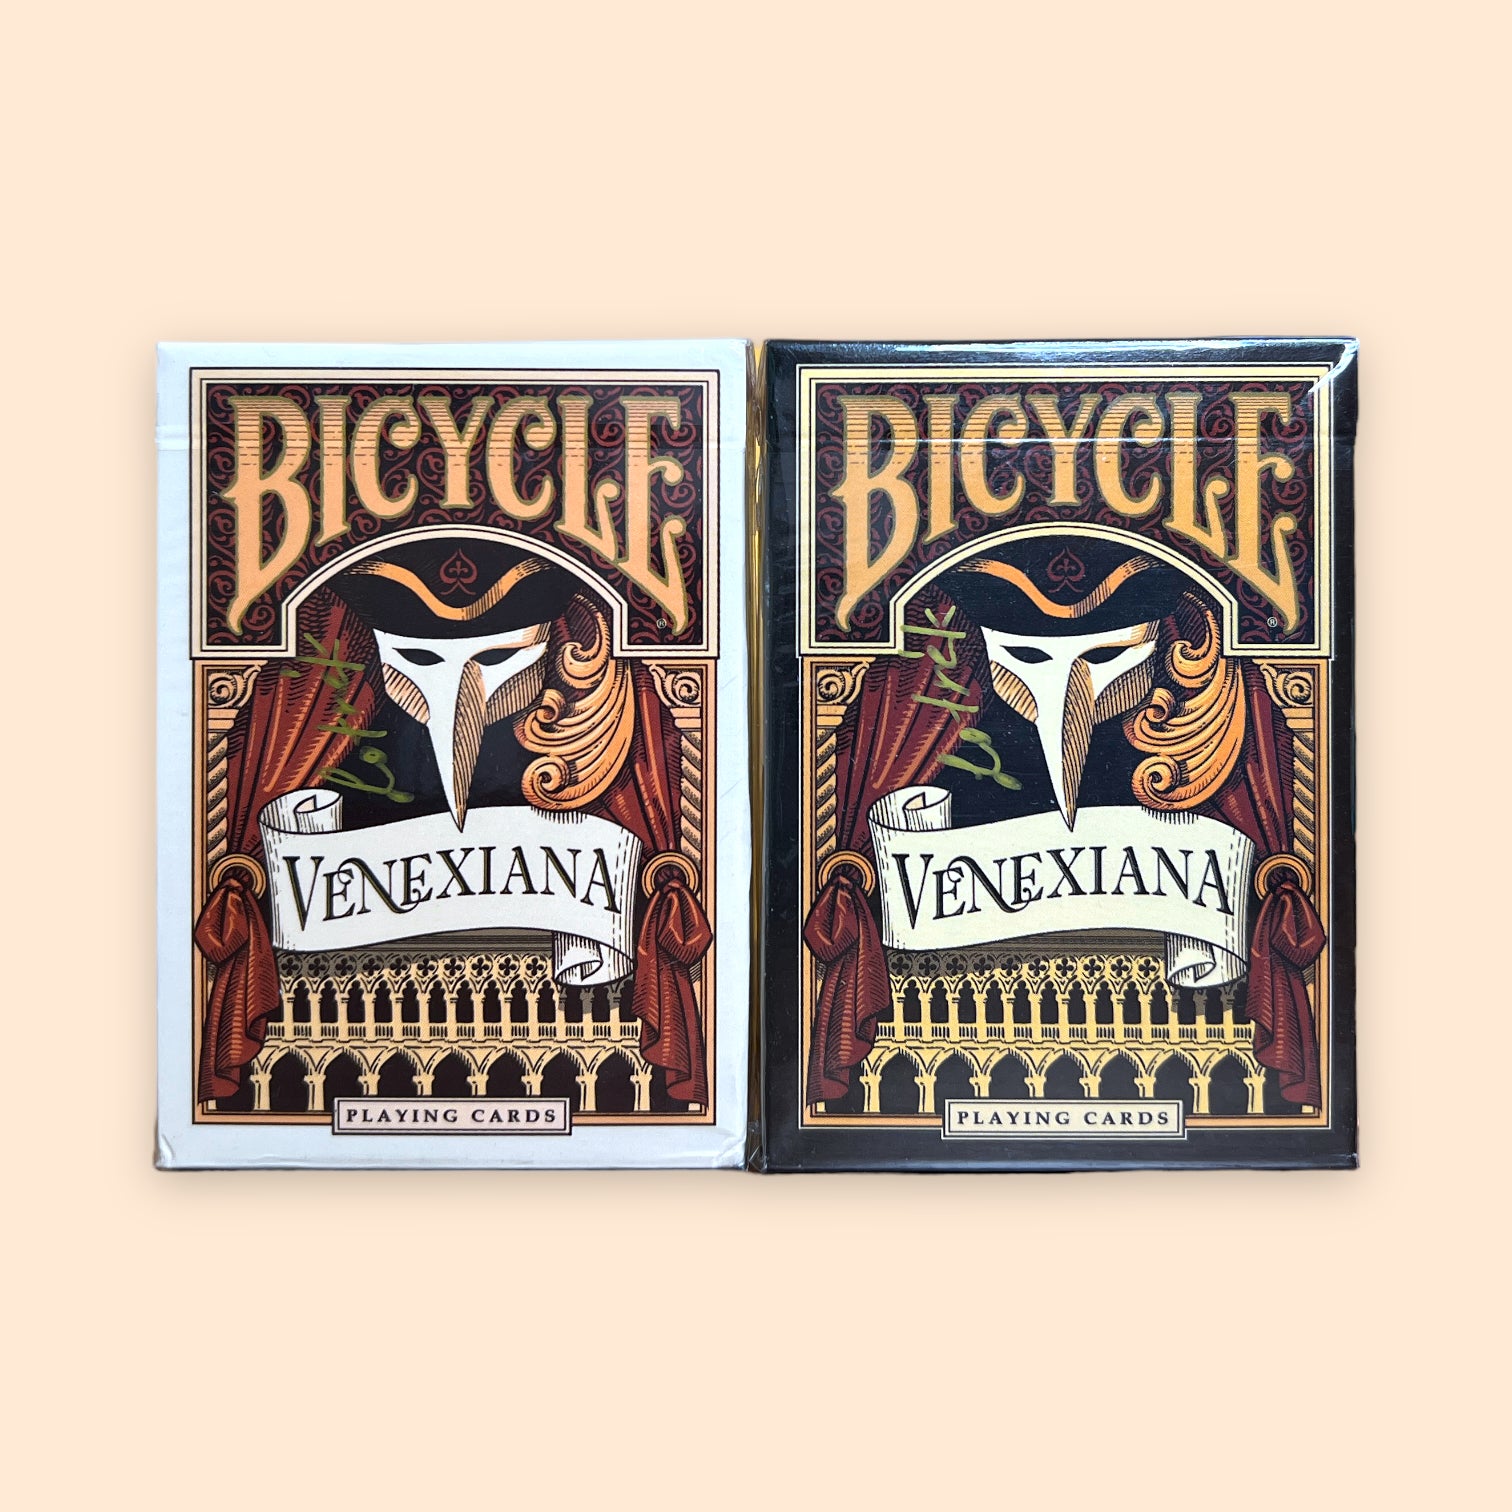 Bicycle Venexiana White and Black playing cards